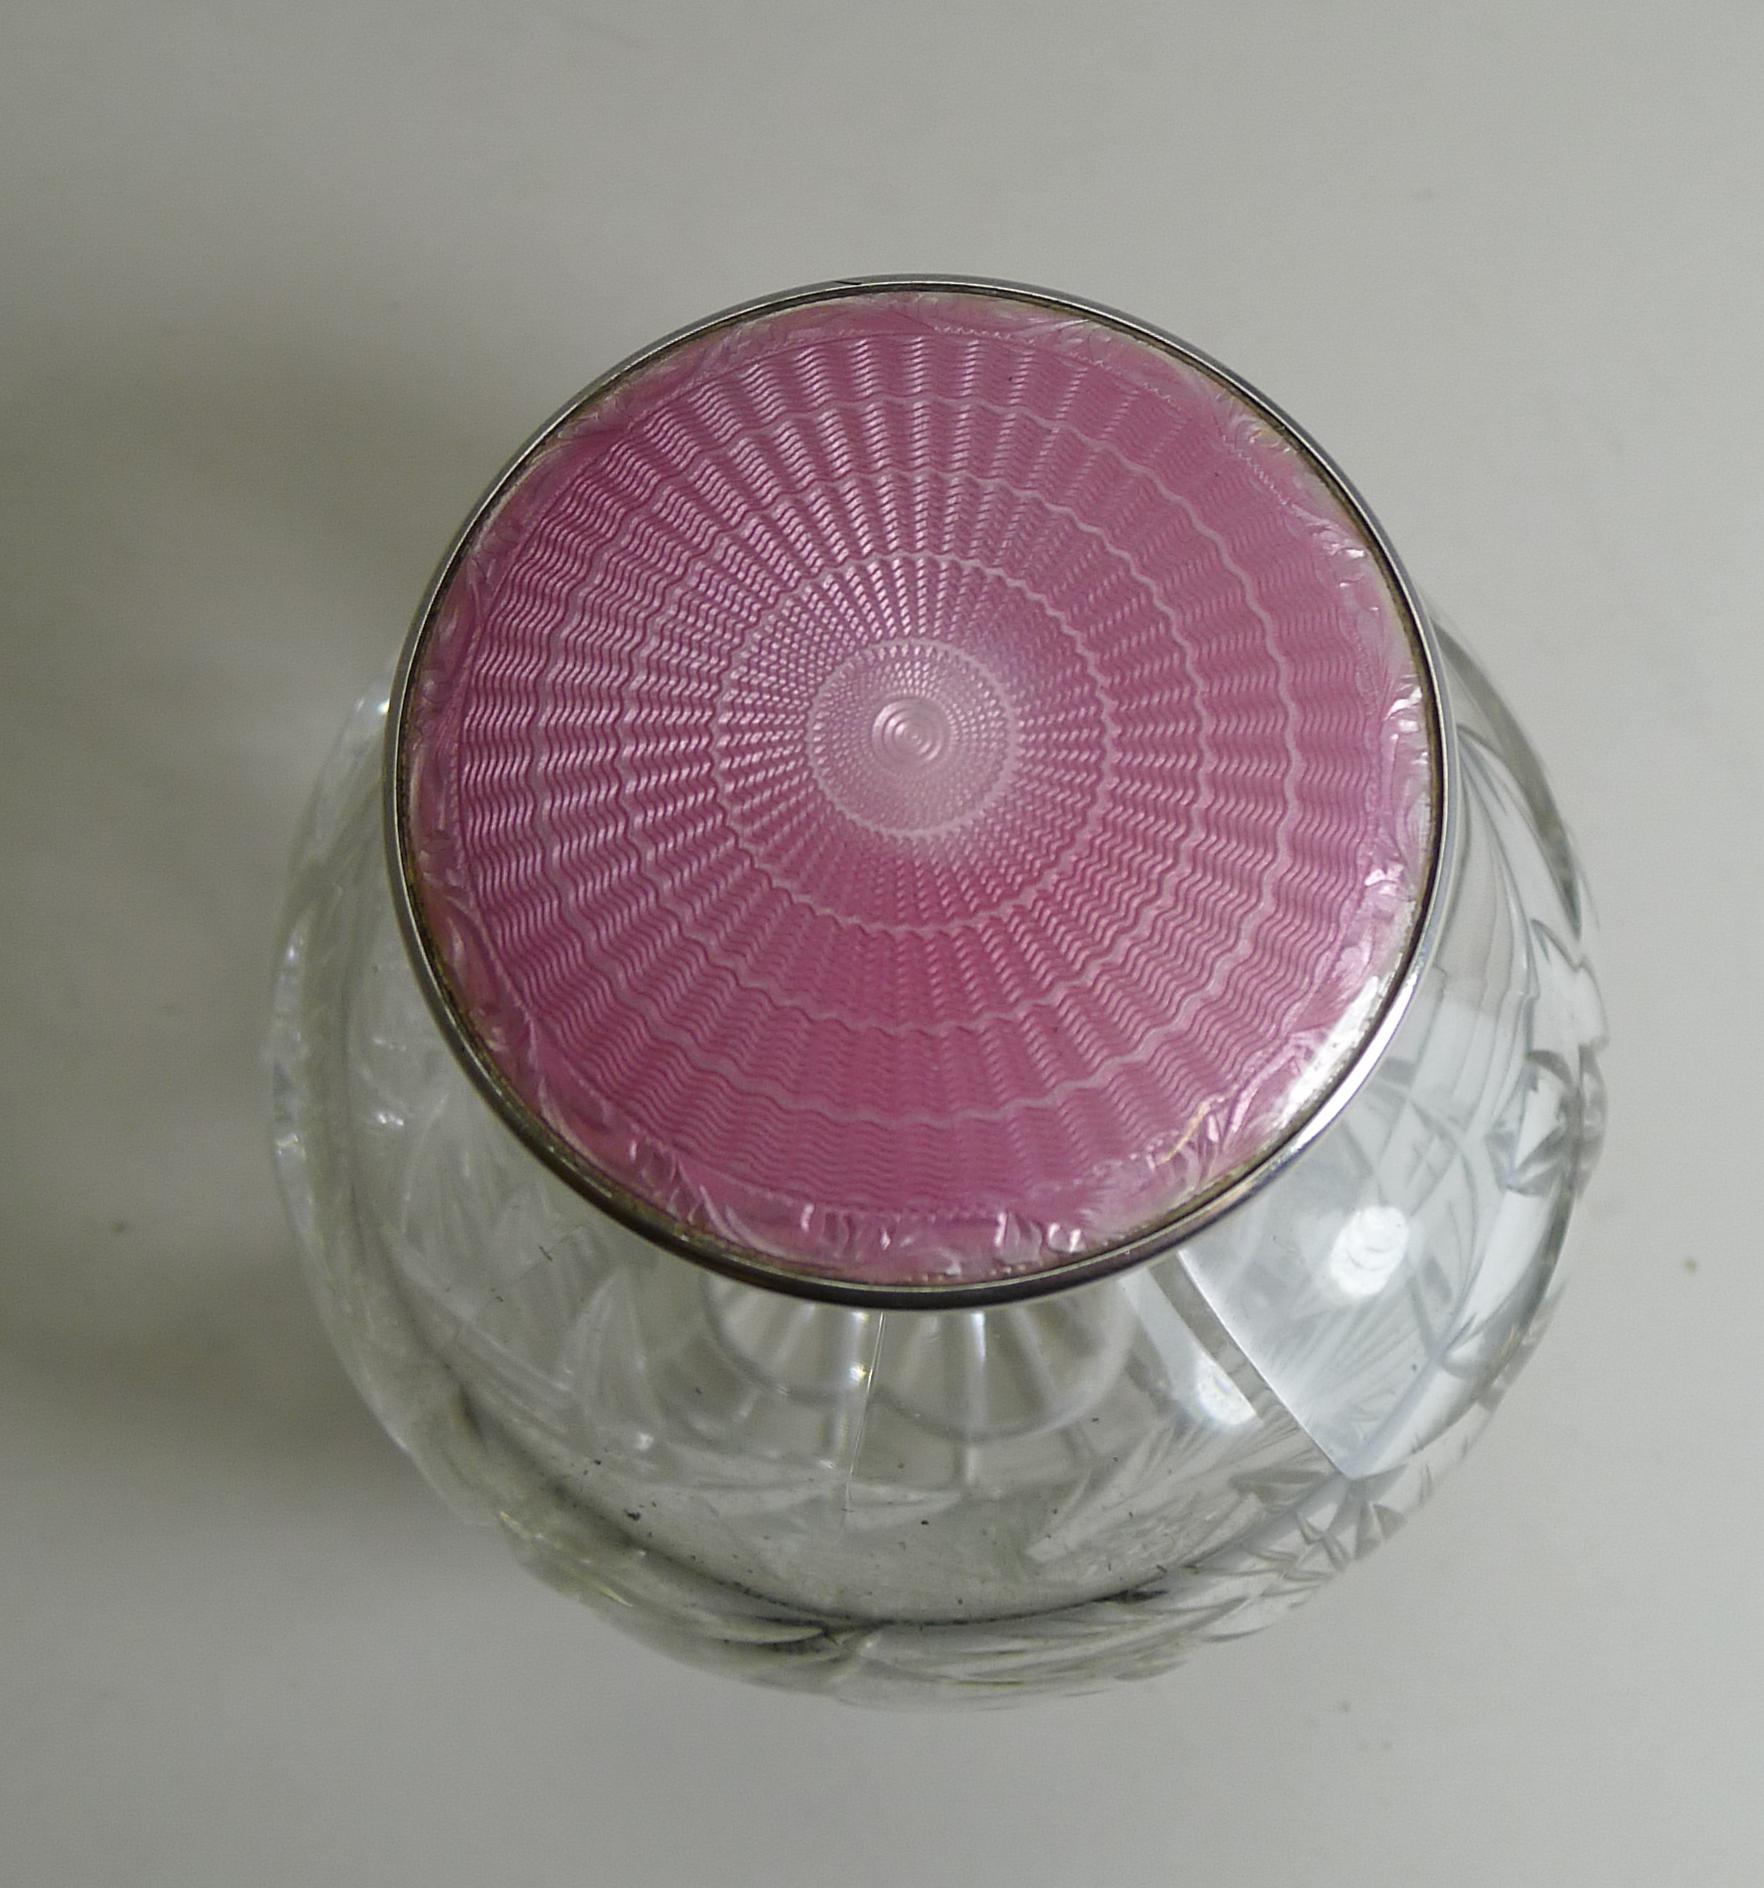 Art Deco Cut Crystal Perfume Bottle, English Sterling Silver and Pink Guilloche Enamel